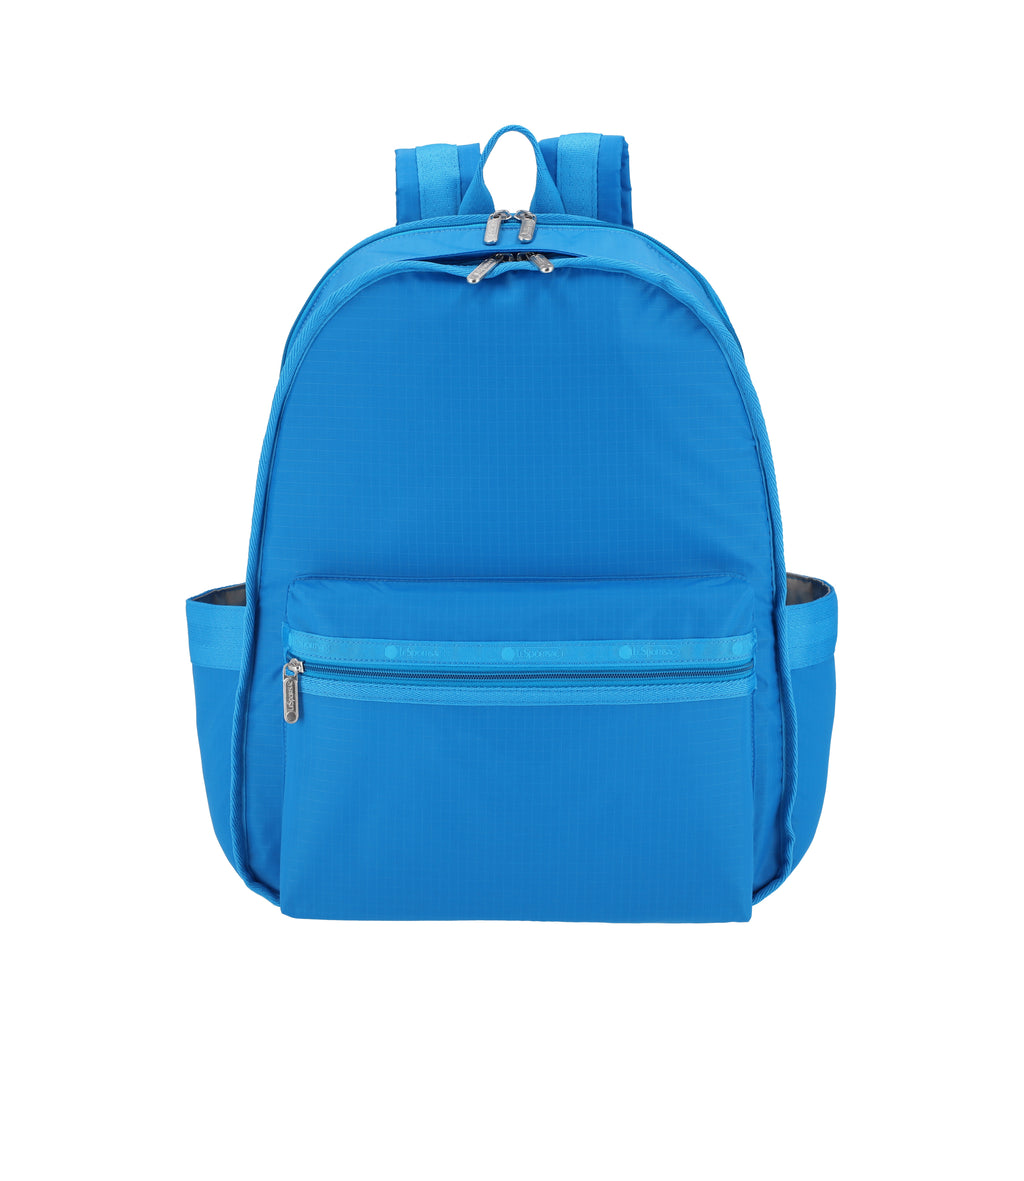 Route Backpack - 24866643378224